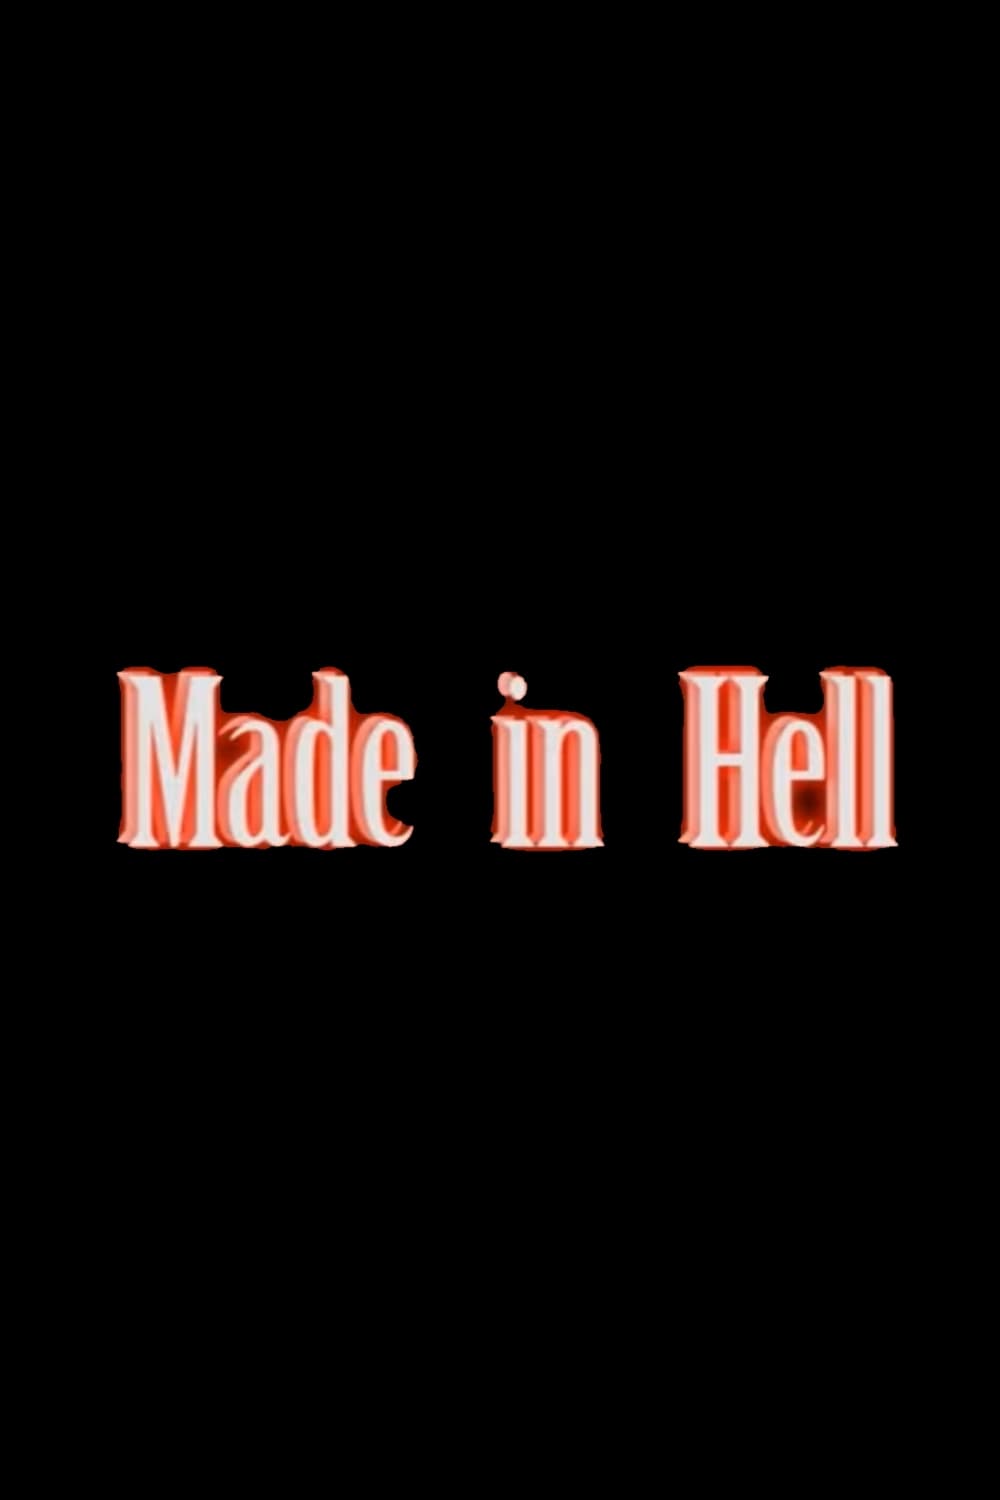 Made in Hell